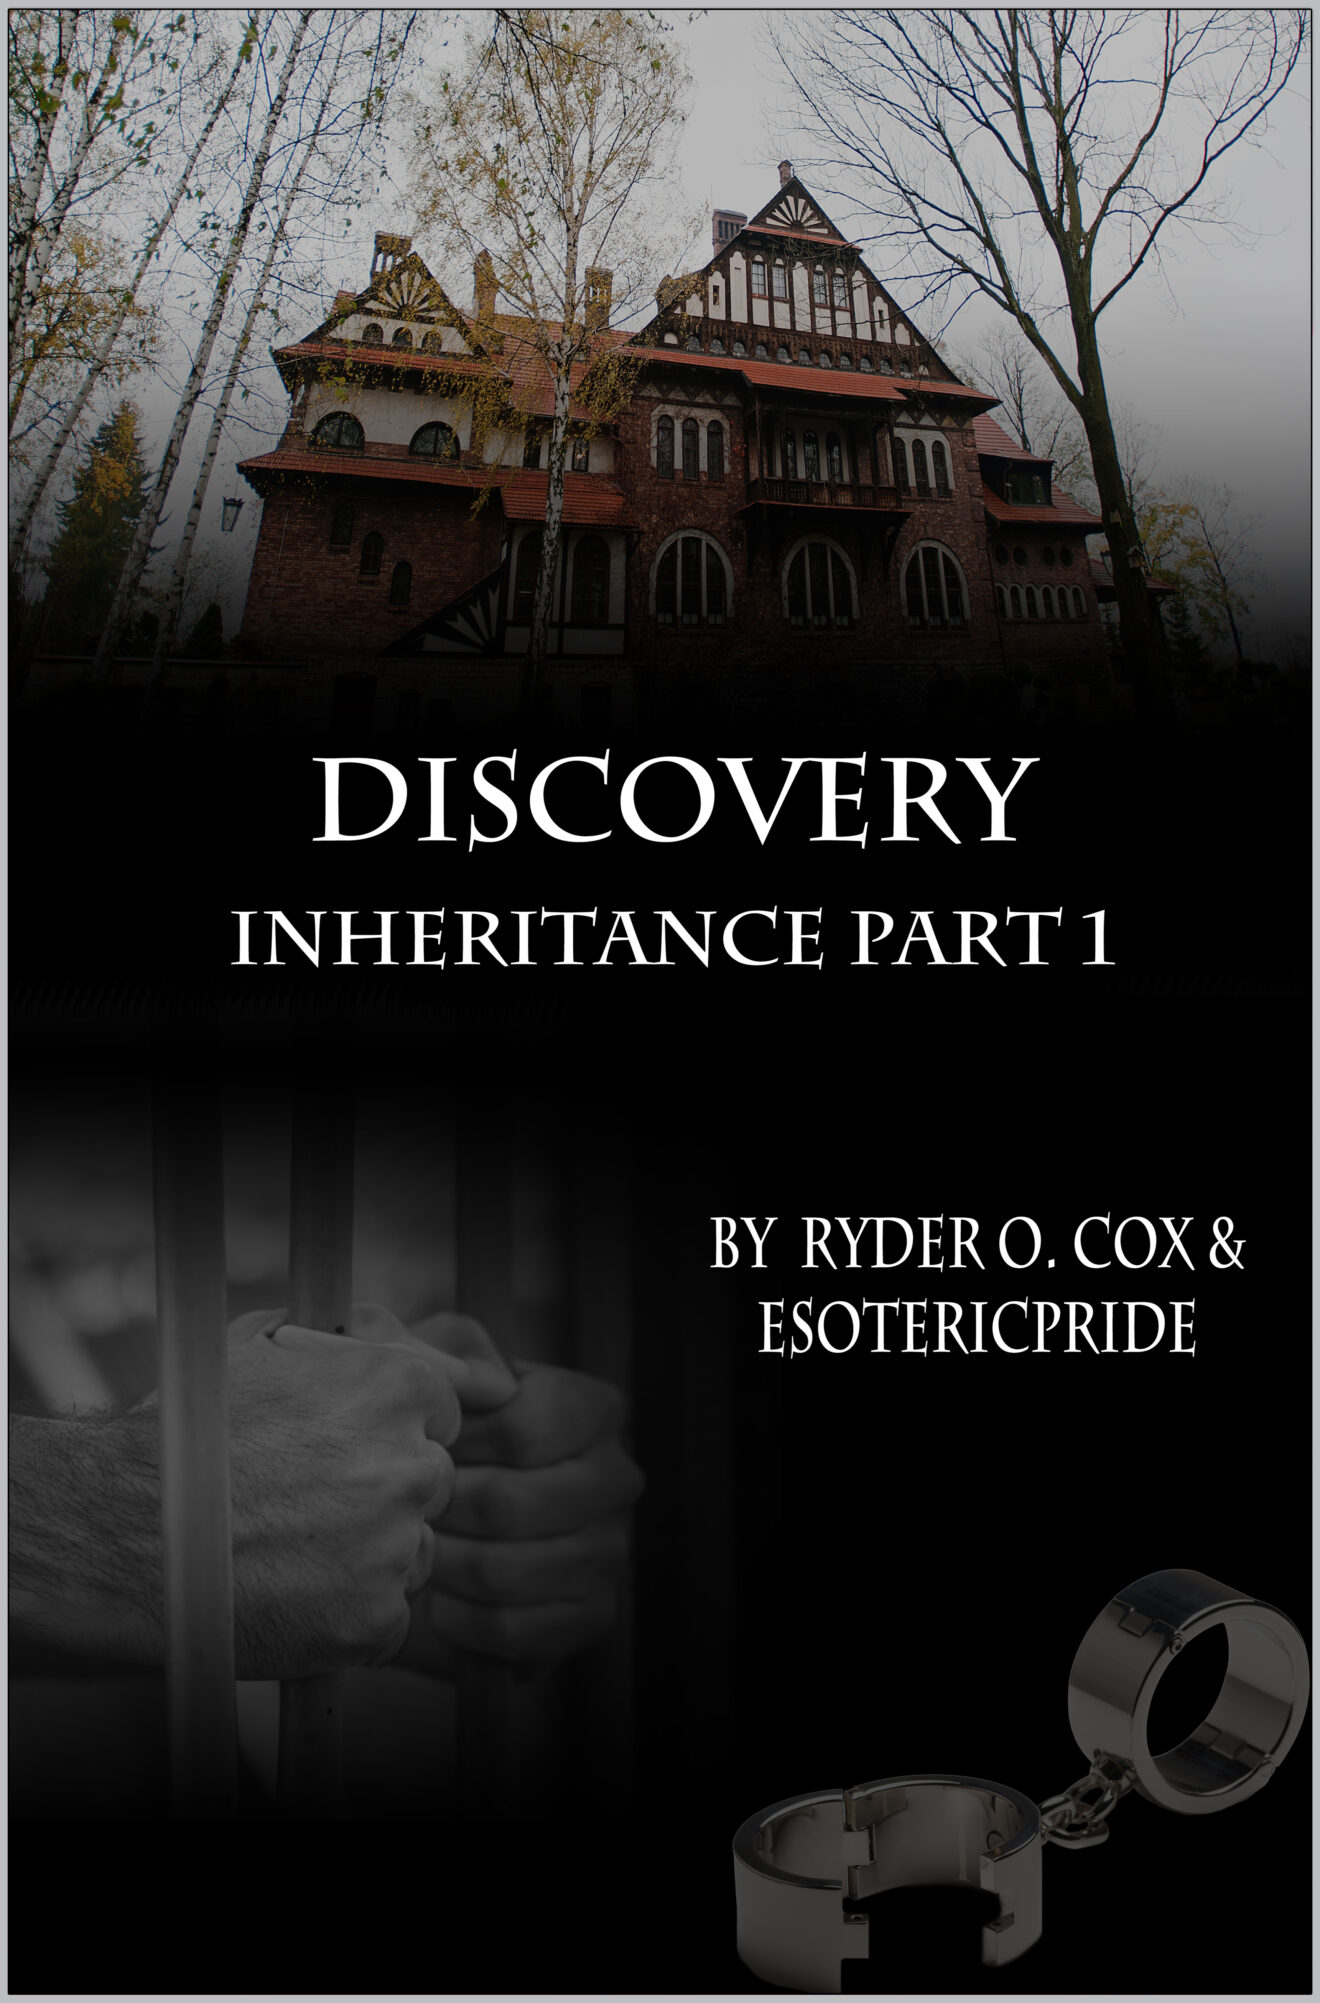 Discovery: Inheritance Part 1, a new menage m/m/m gay romance series!